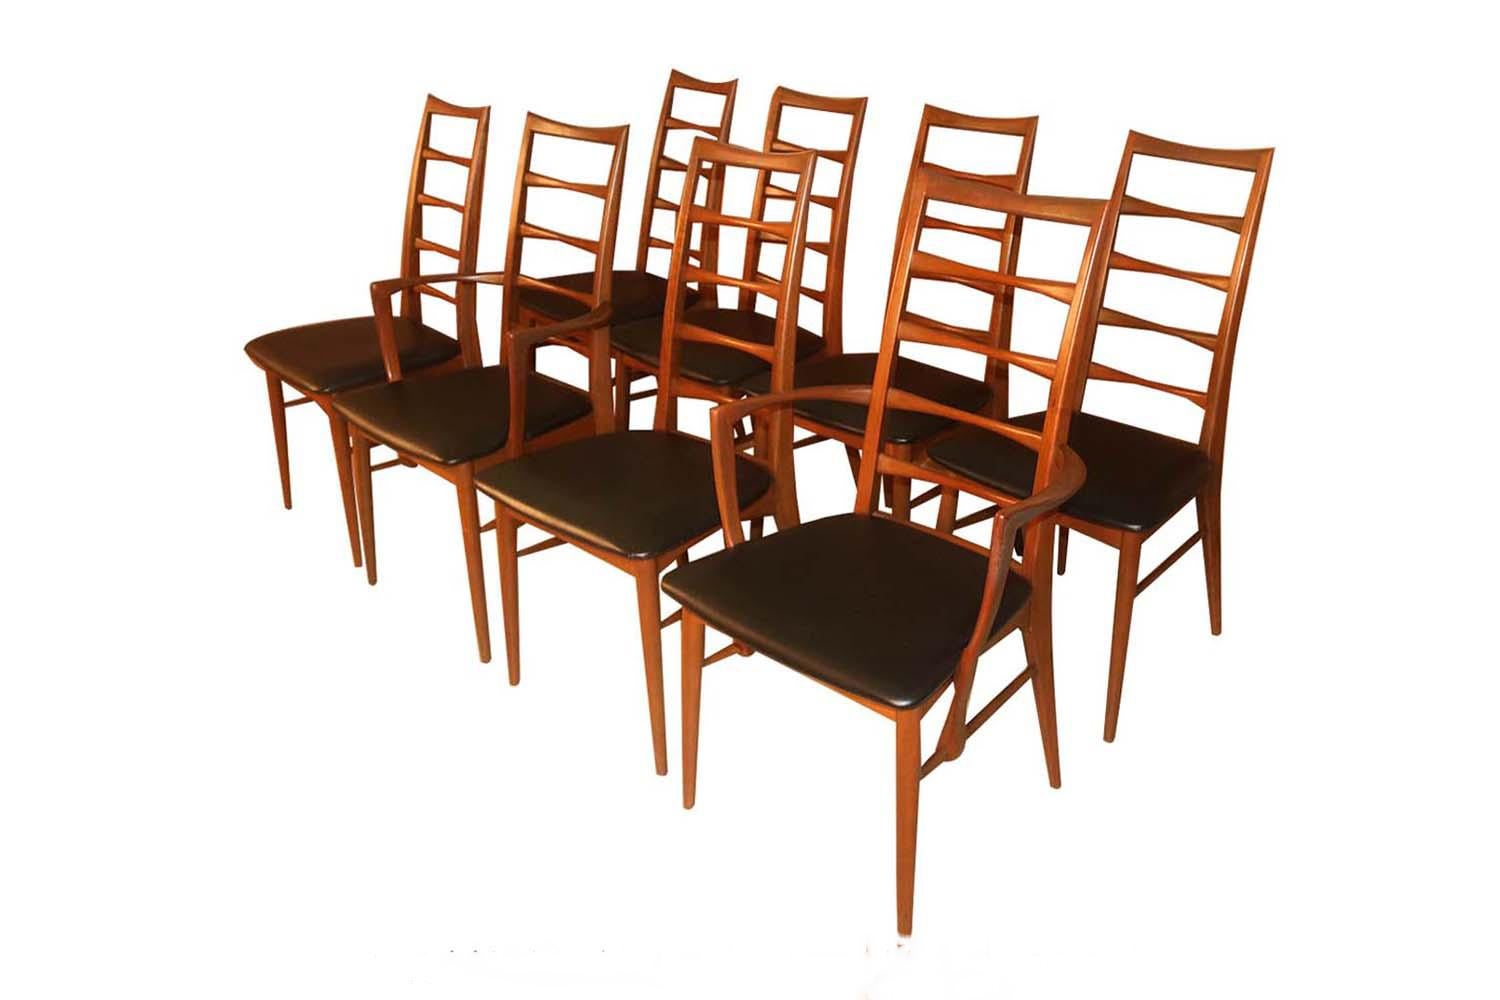 An outstanding set of eight teak dining chairs designed by Niels Koefoed for Koefoeds Hornslet, model 